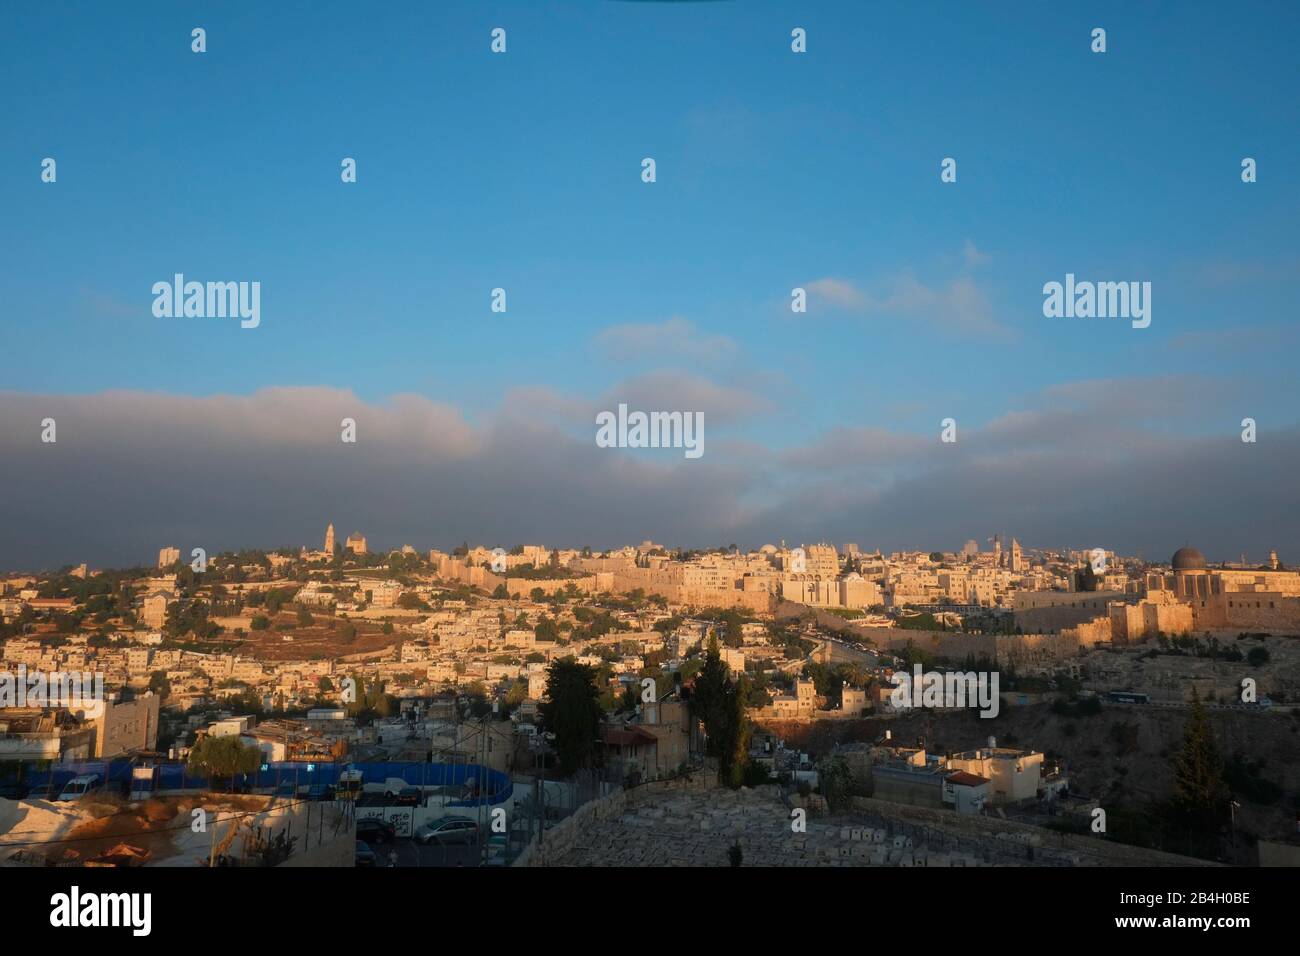 Israel, The Old City of Jerusalem (al-Balda al-Qadimah) is that part of Jerusalem surrounded by the impressive 16th-century Ottoman city walls and rep Stock Photo